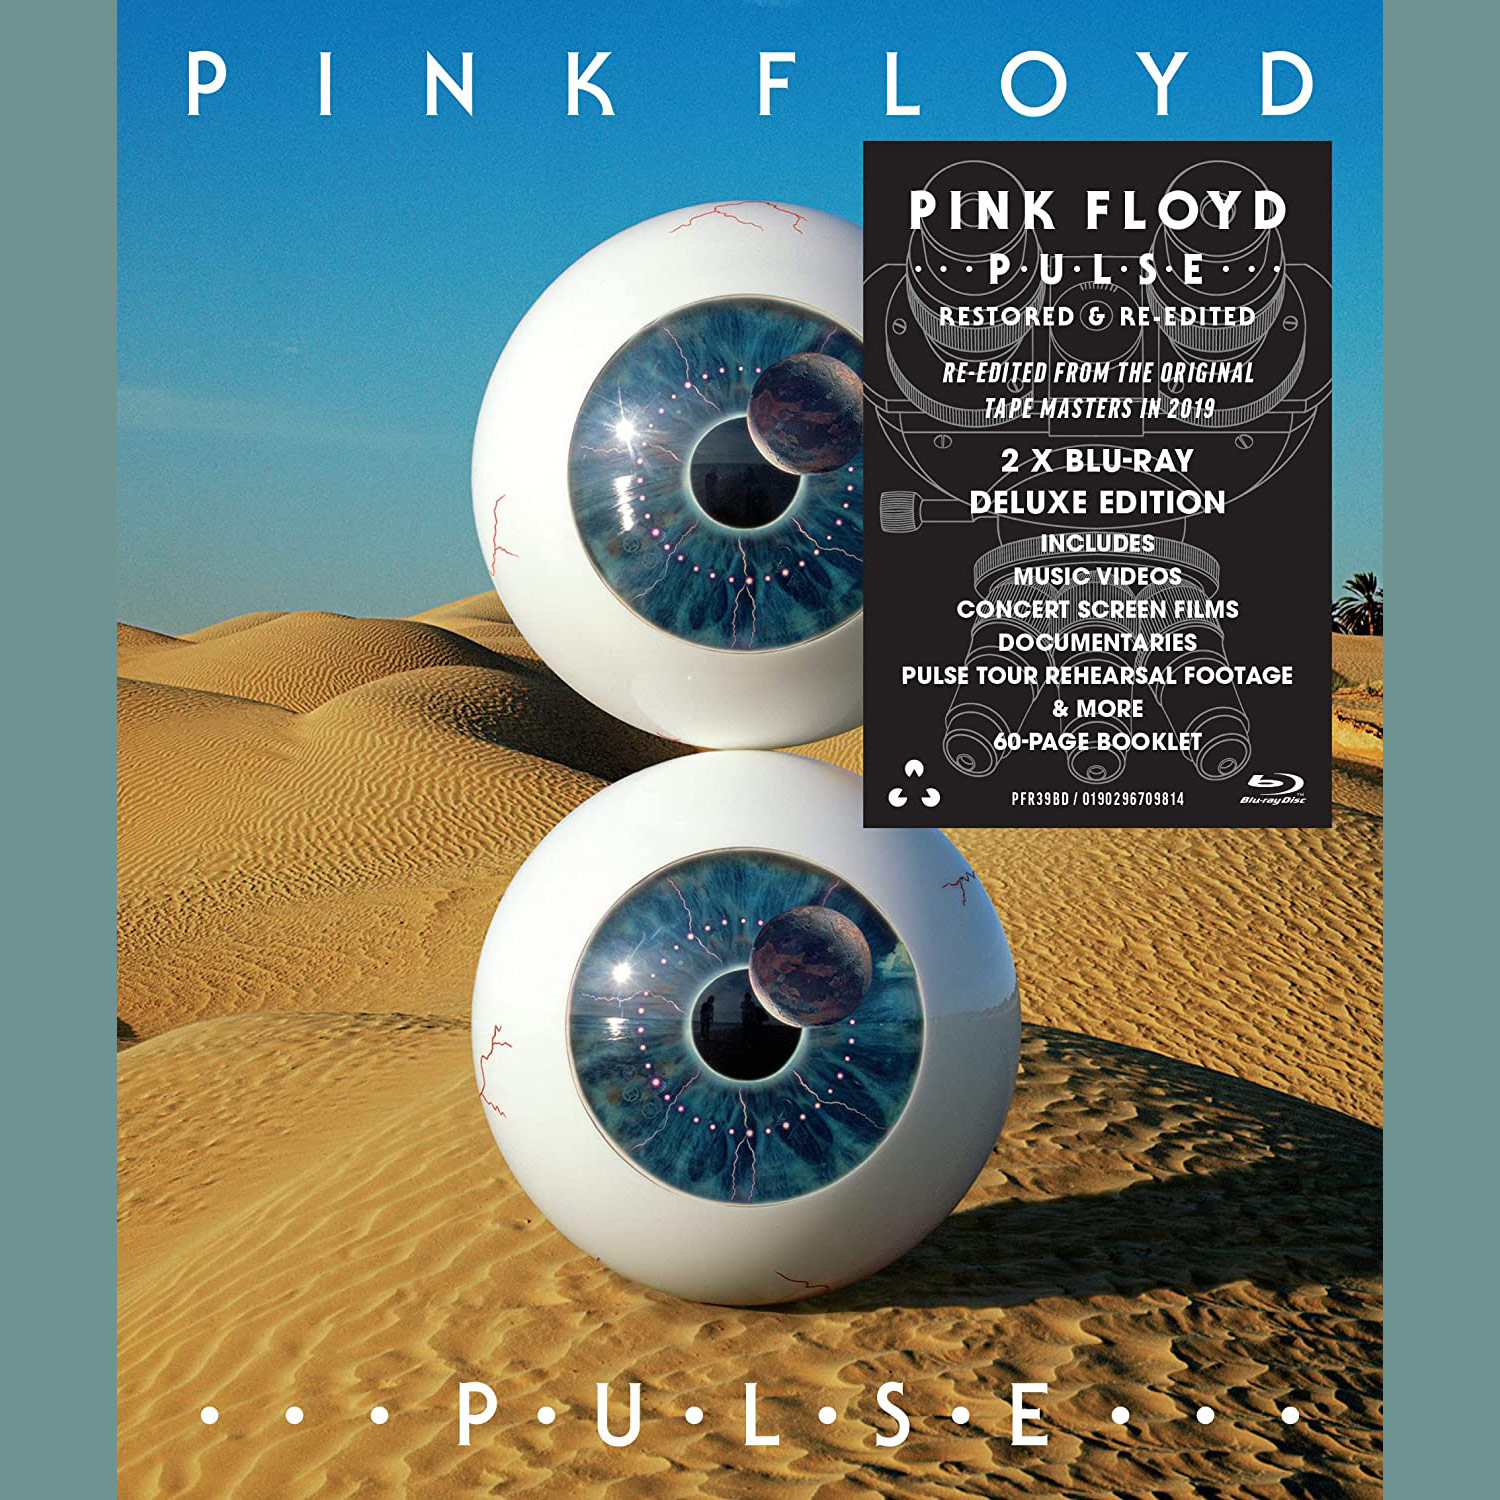 Pink Floyd / Pulse restored and re-edited reissue